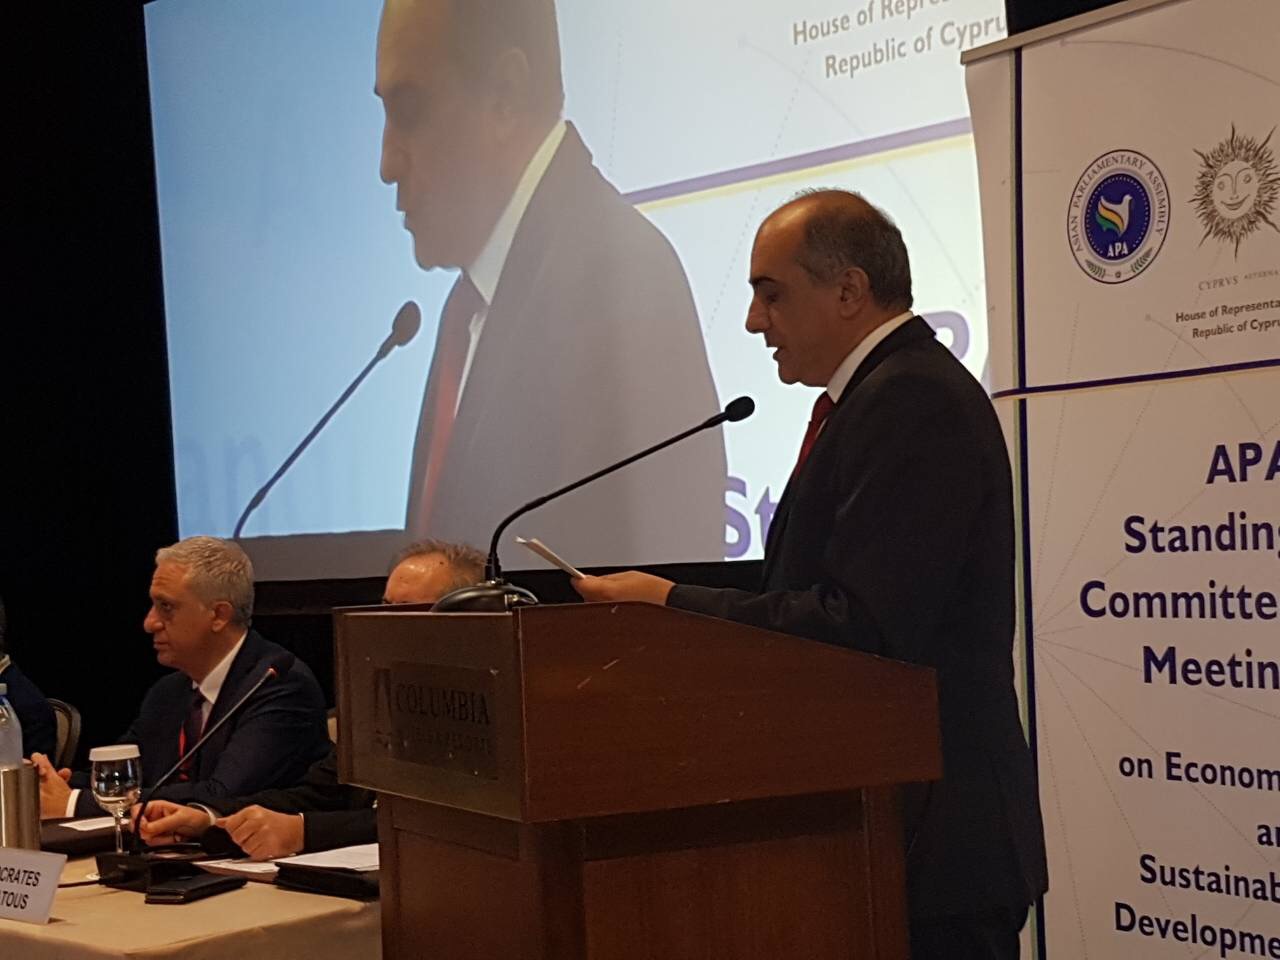 Official Opening of the APA Standing Committee Meeting by H.E. the President of the Cyprus HoR - 26/6/2018